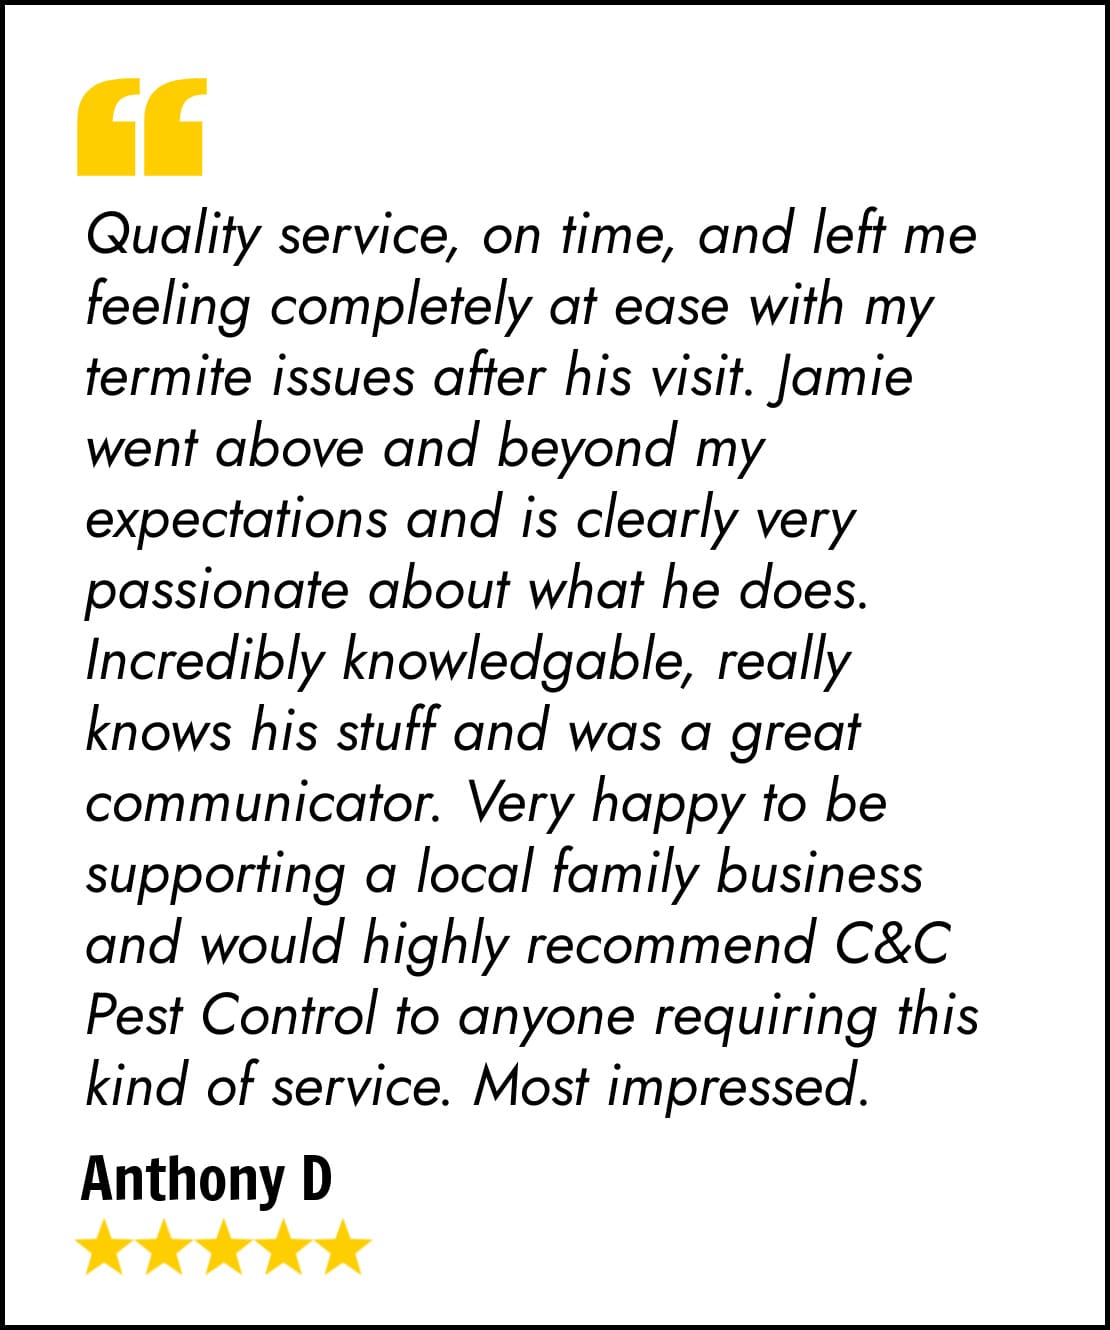 5 star testimonial by Anthony D